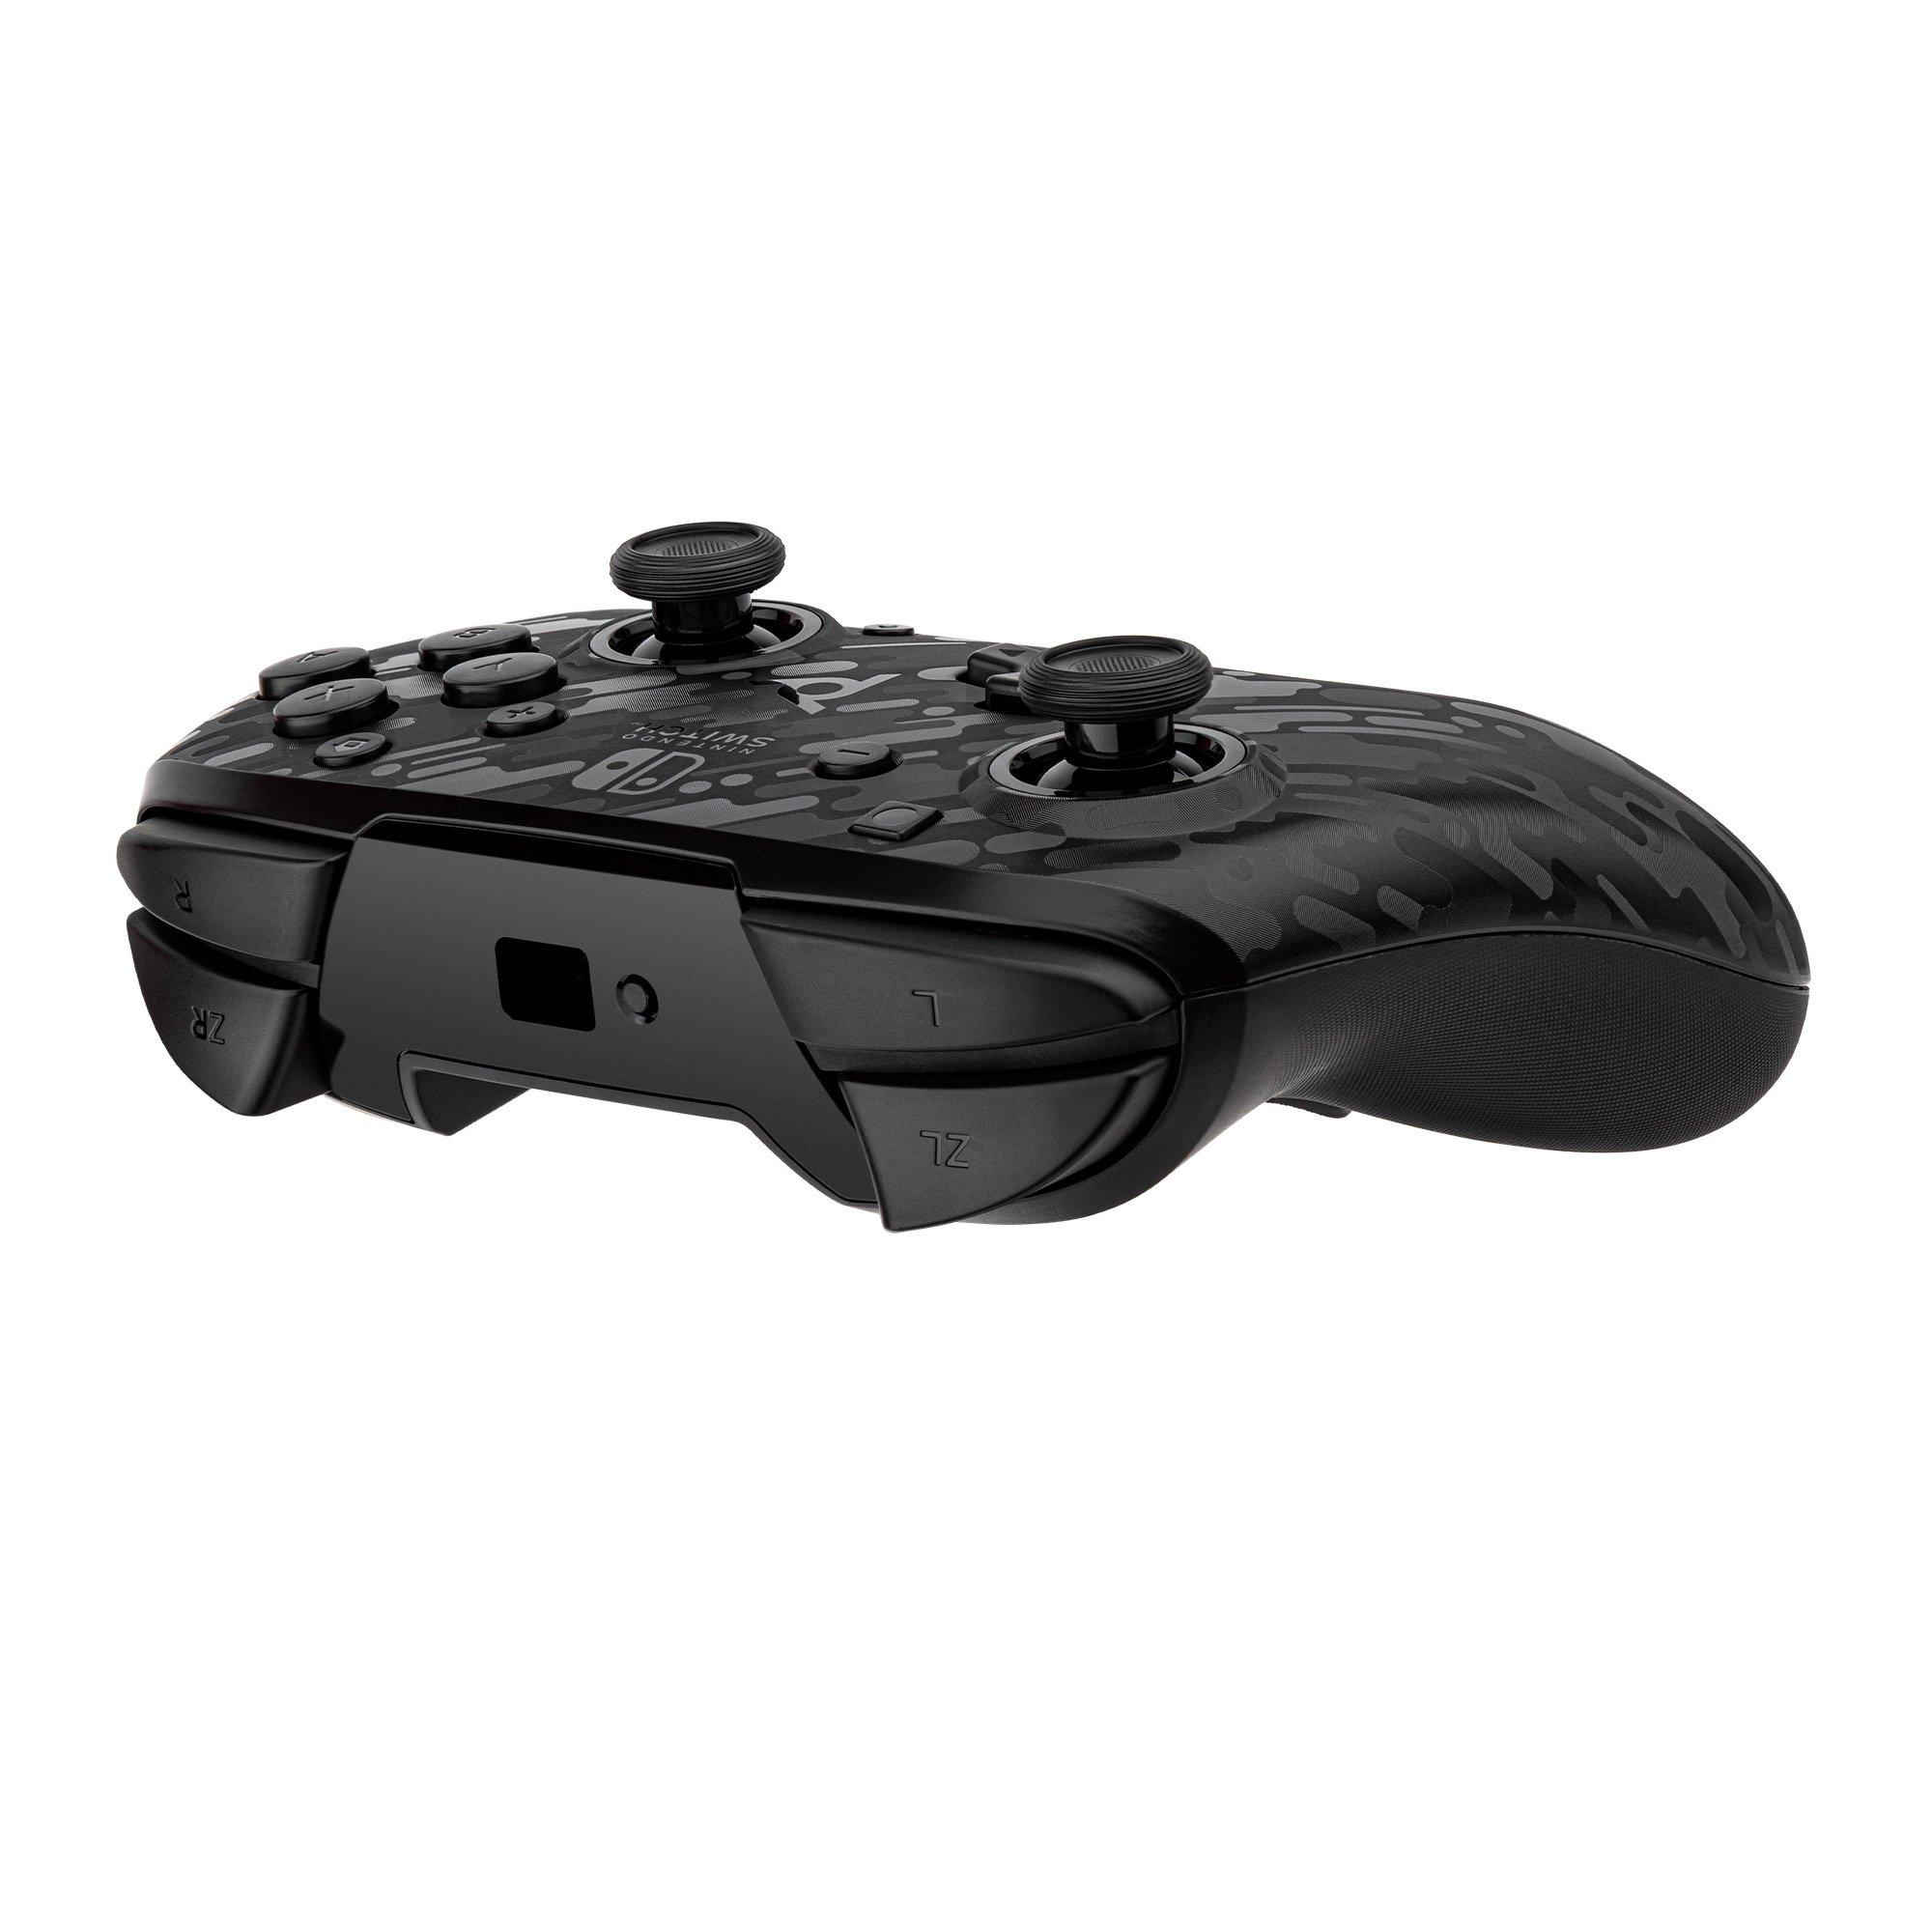 list item 7 of 10 Faceoff Black Camo Wireless Deluxe Controller for Nintendo Switch